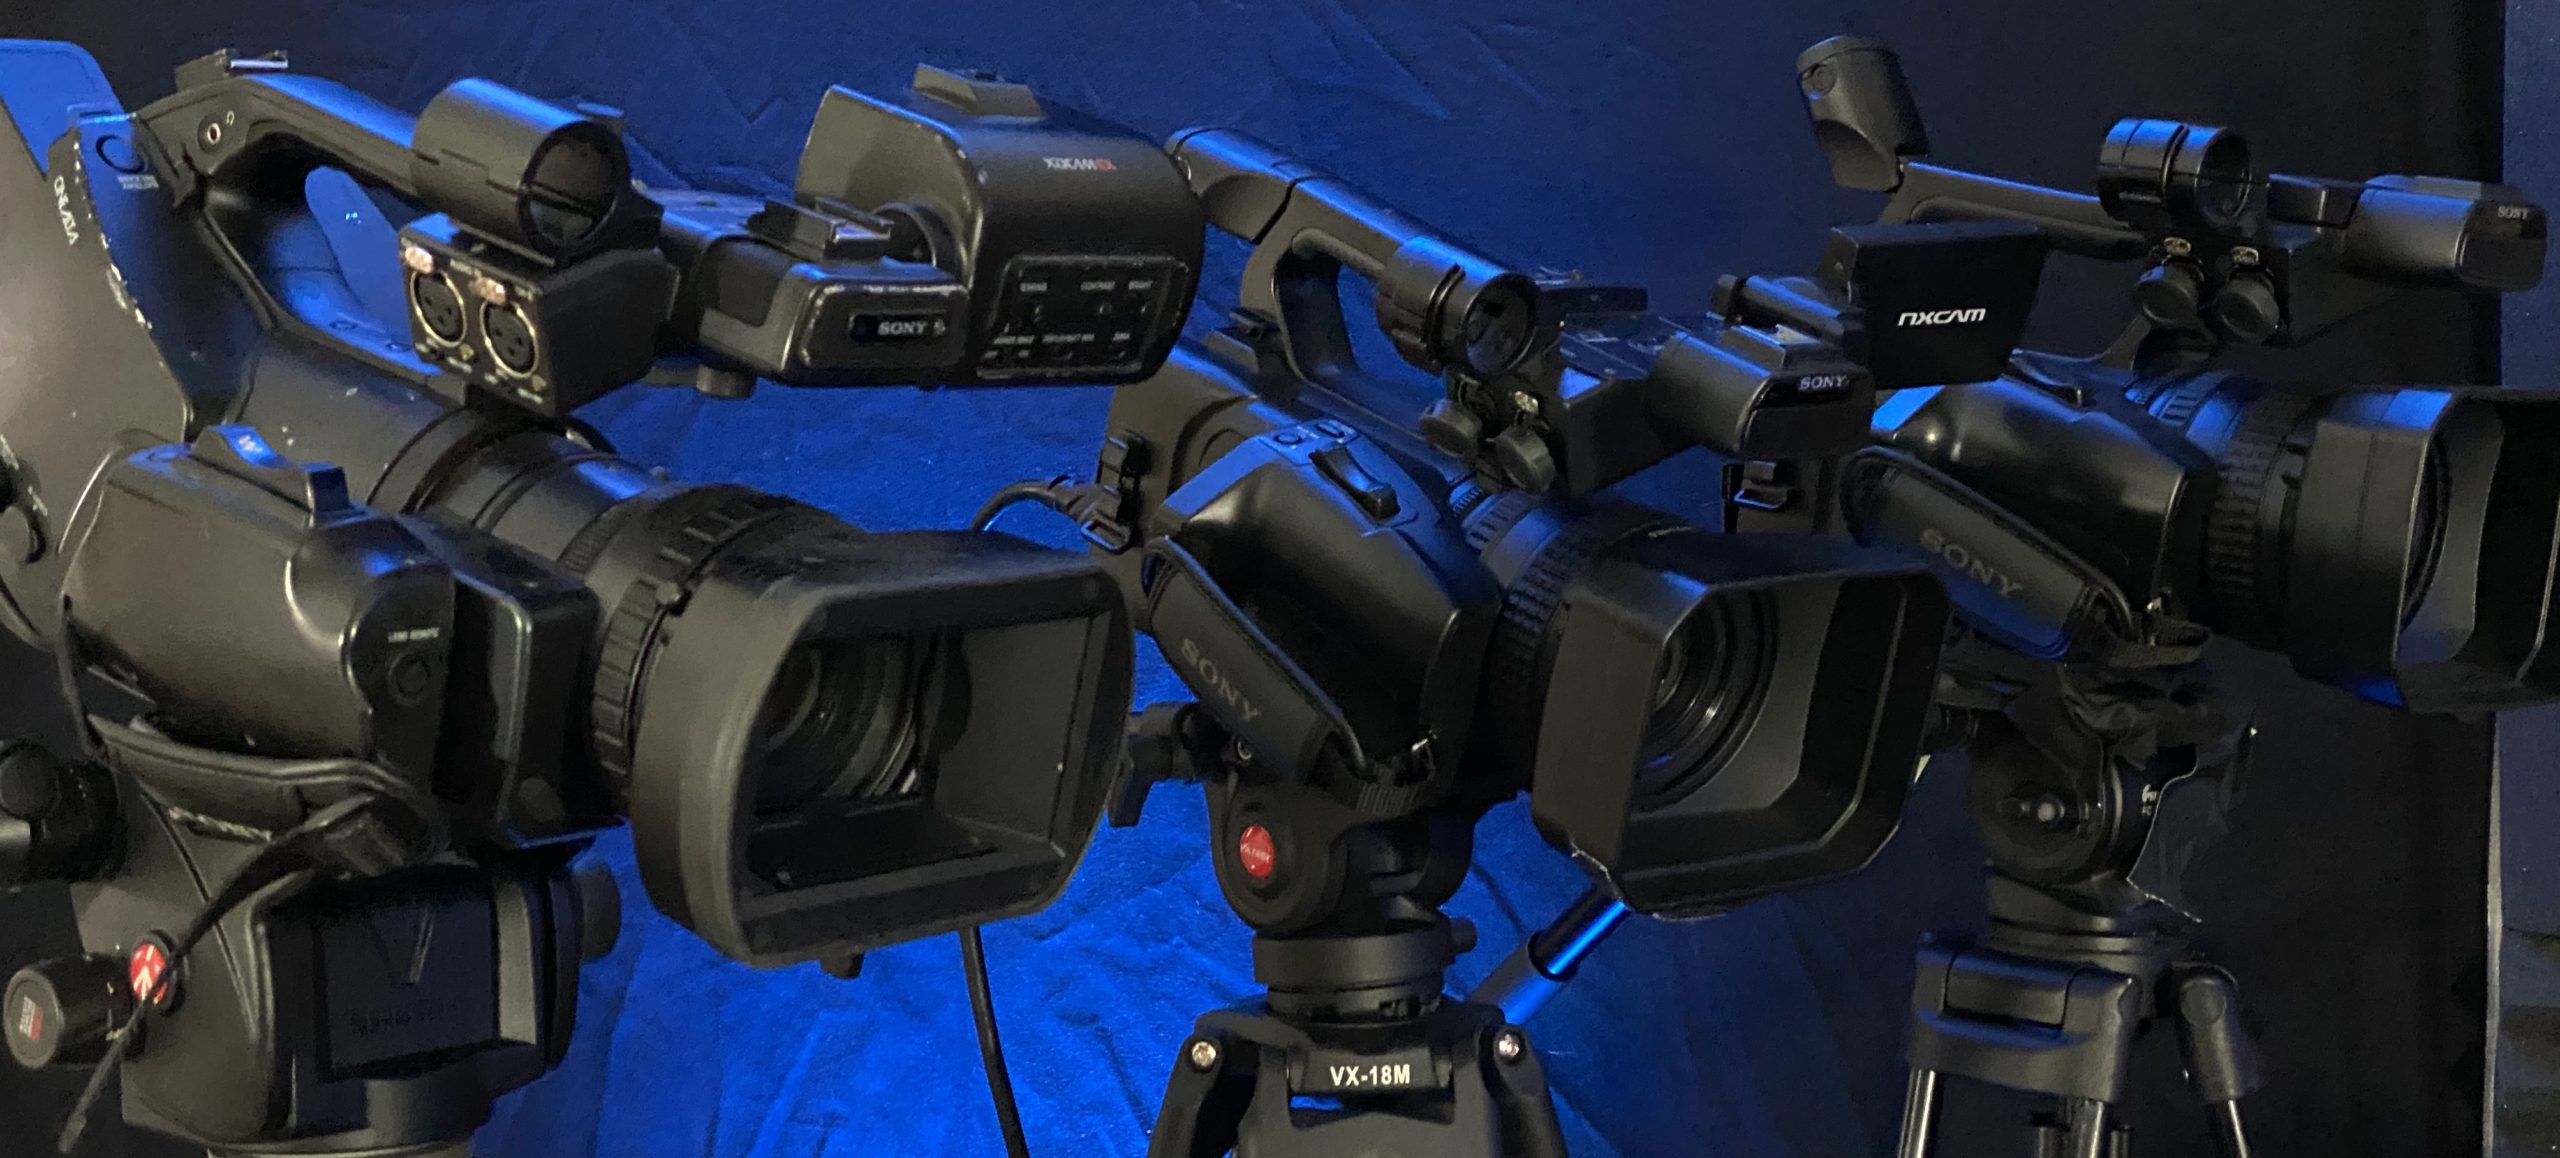 Corporate Video Production and Live Streaming Company